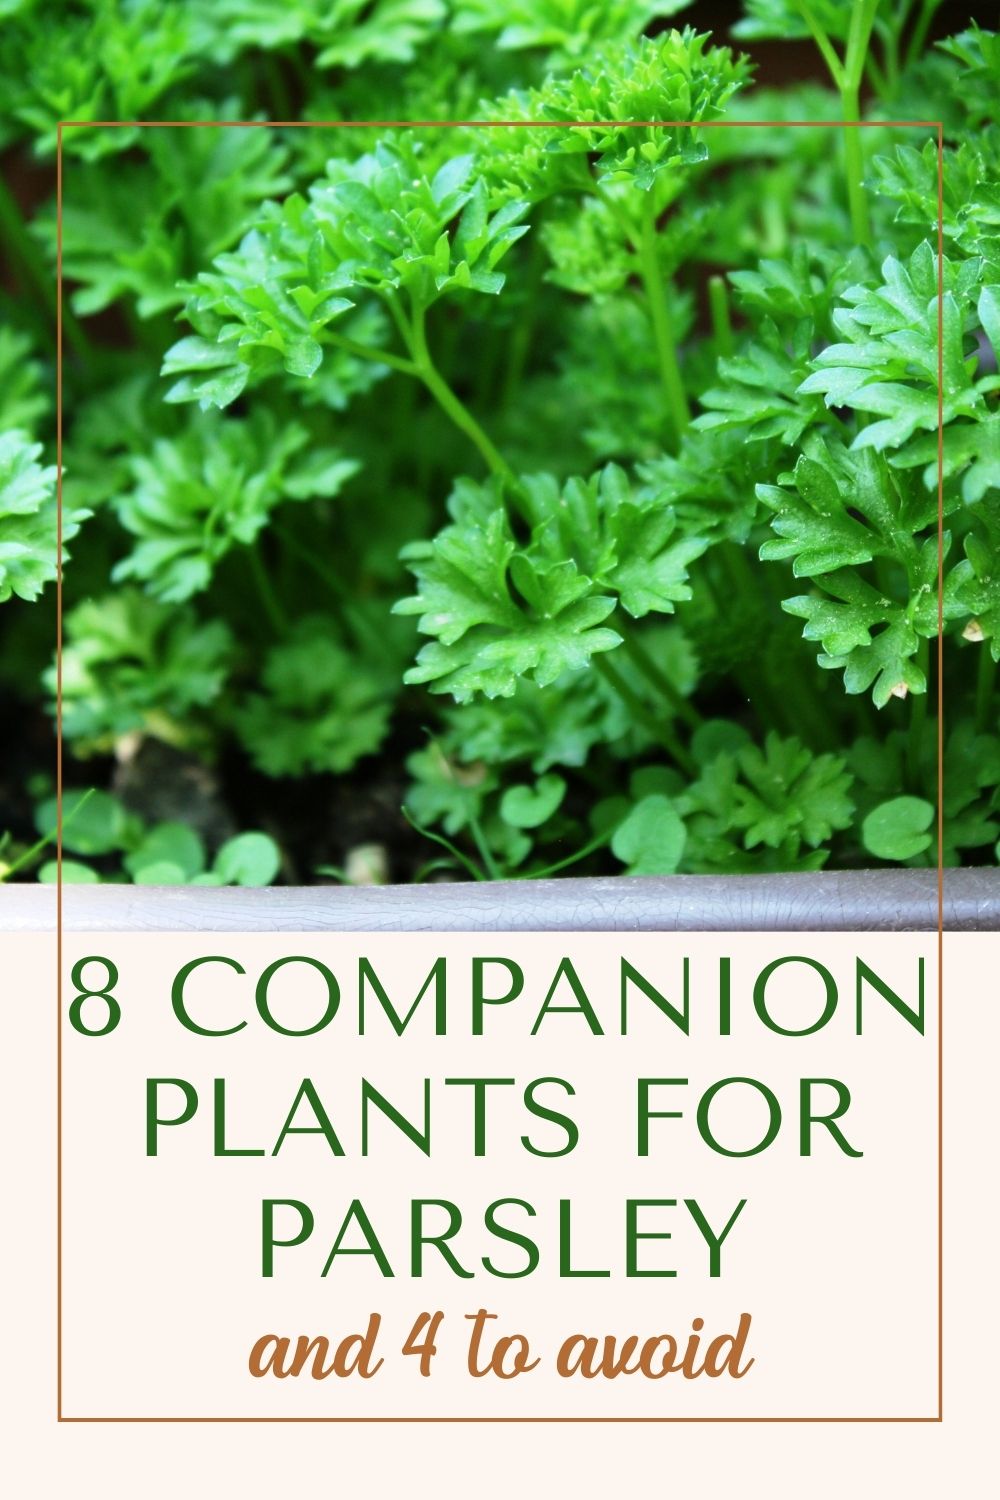 8 companion plants for parsley and 4 to avoid.